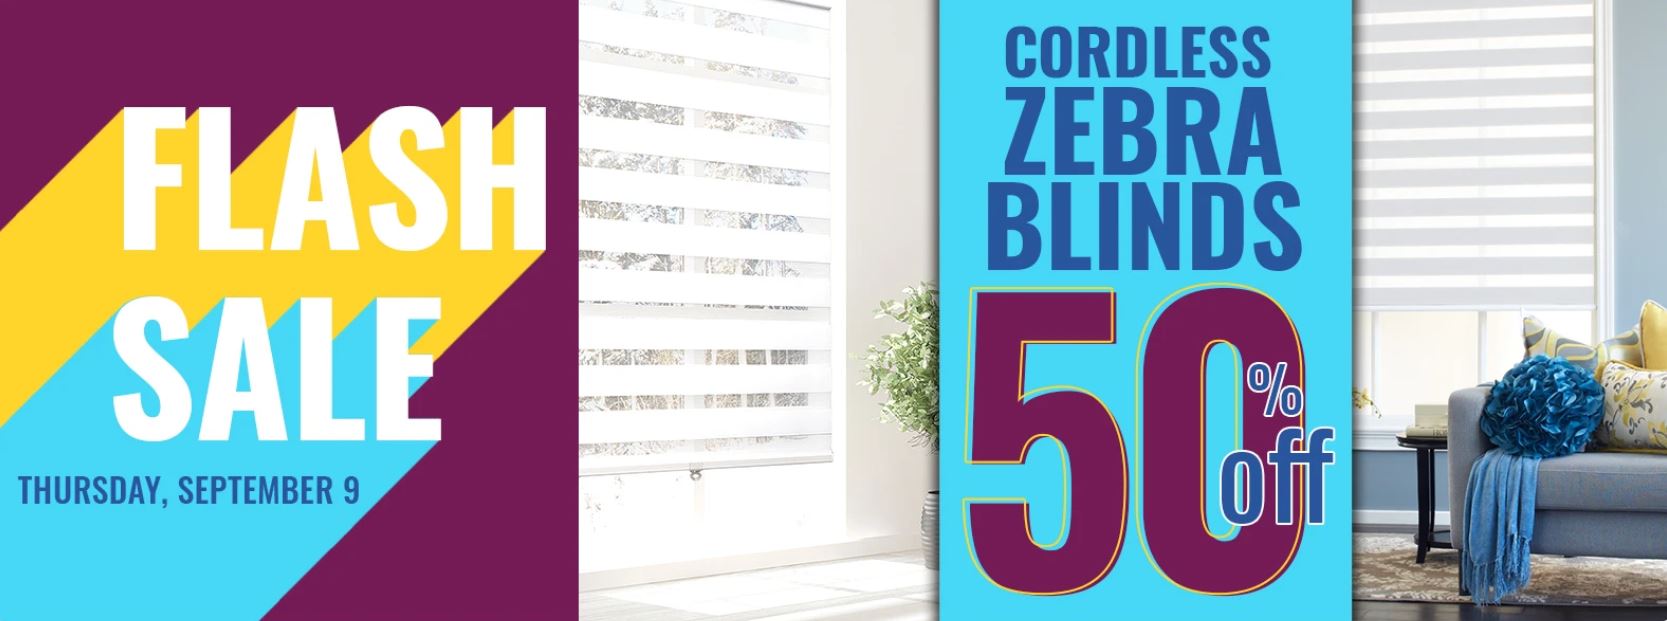 Fabricville Canada Flash Sale: Save 40% OFF Bulk Notions + 50% OFF Cordless Zebra Blinds + More